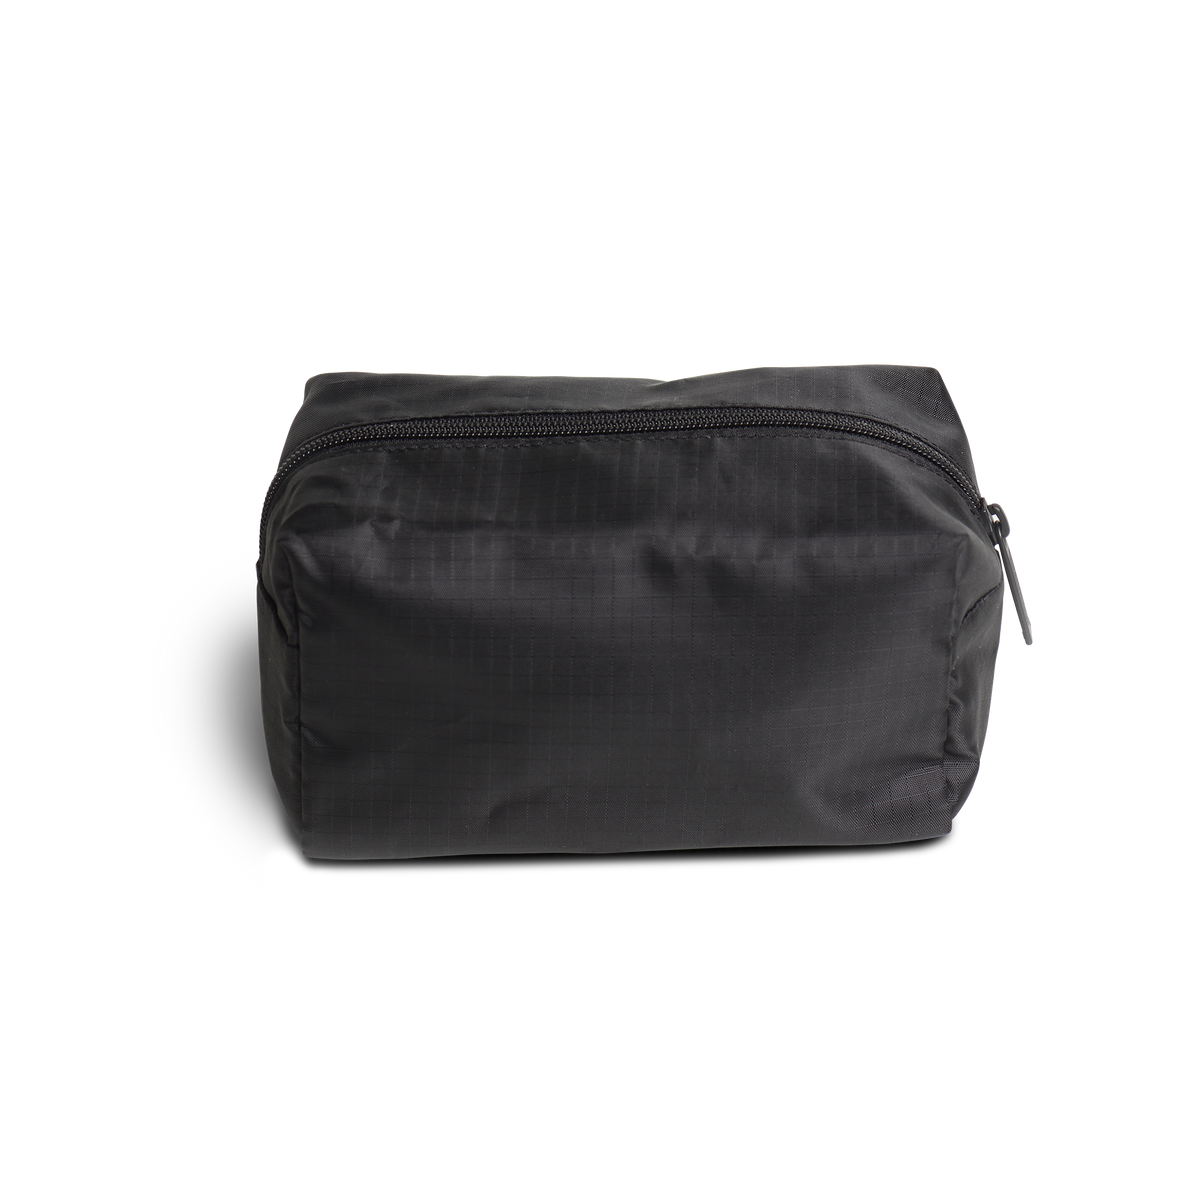 Front view, full zippered travel pouch, closed, in black.